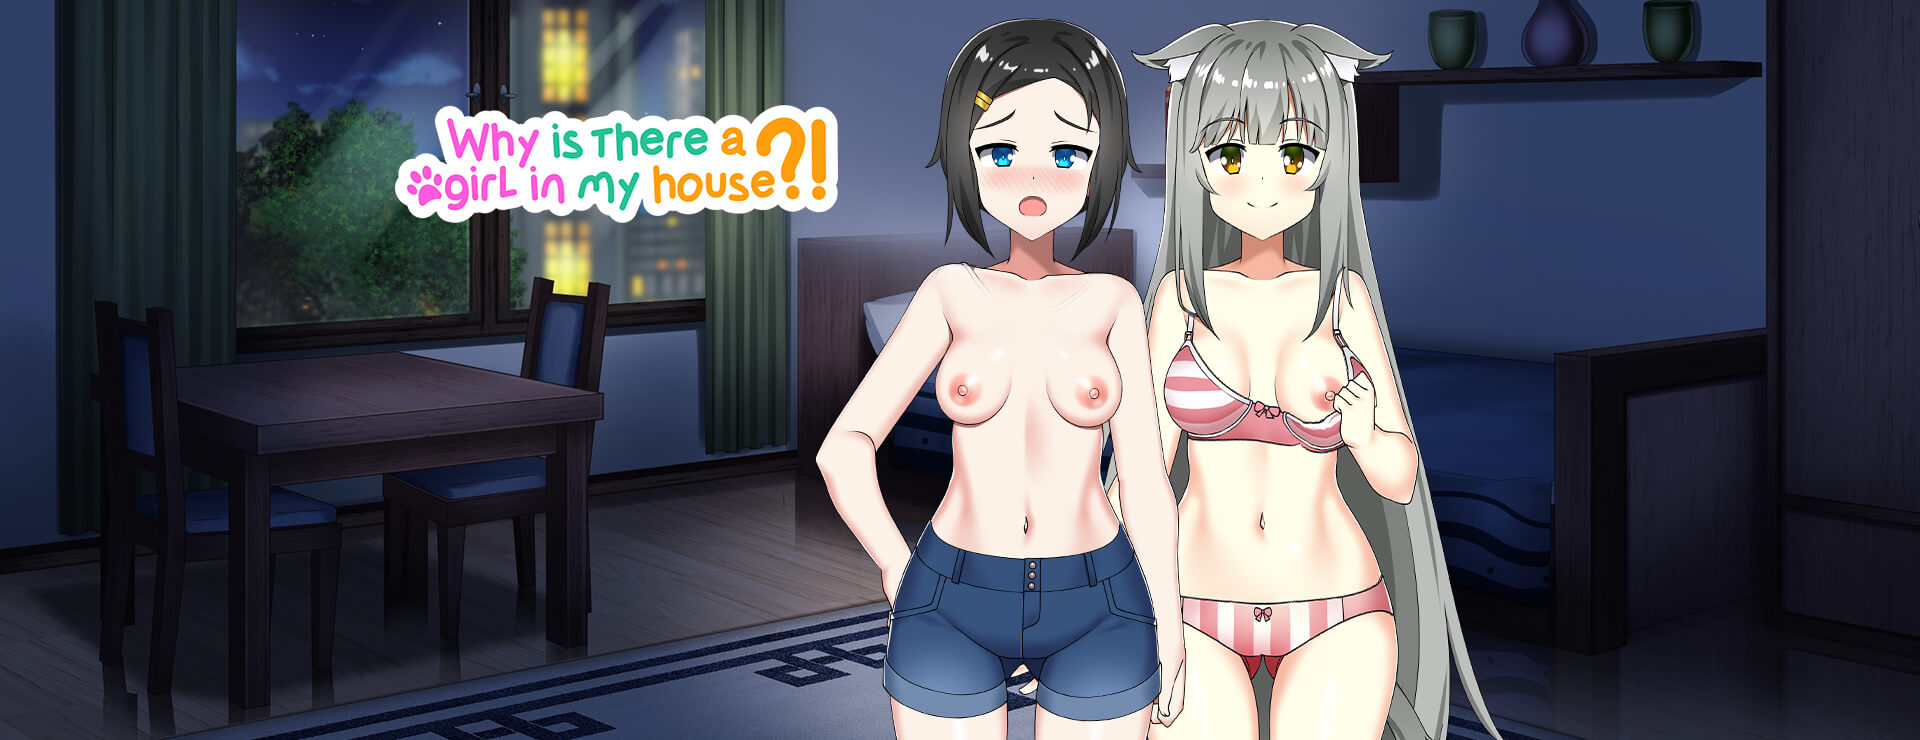 Why Is There A Girl In My House?! - Novela Visual Juego